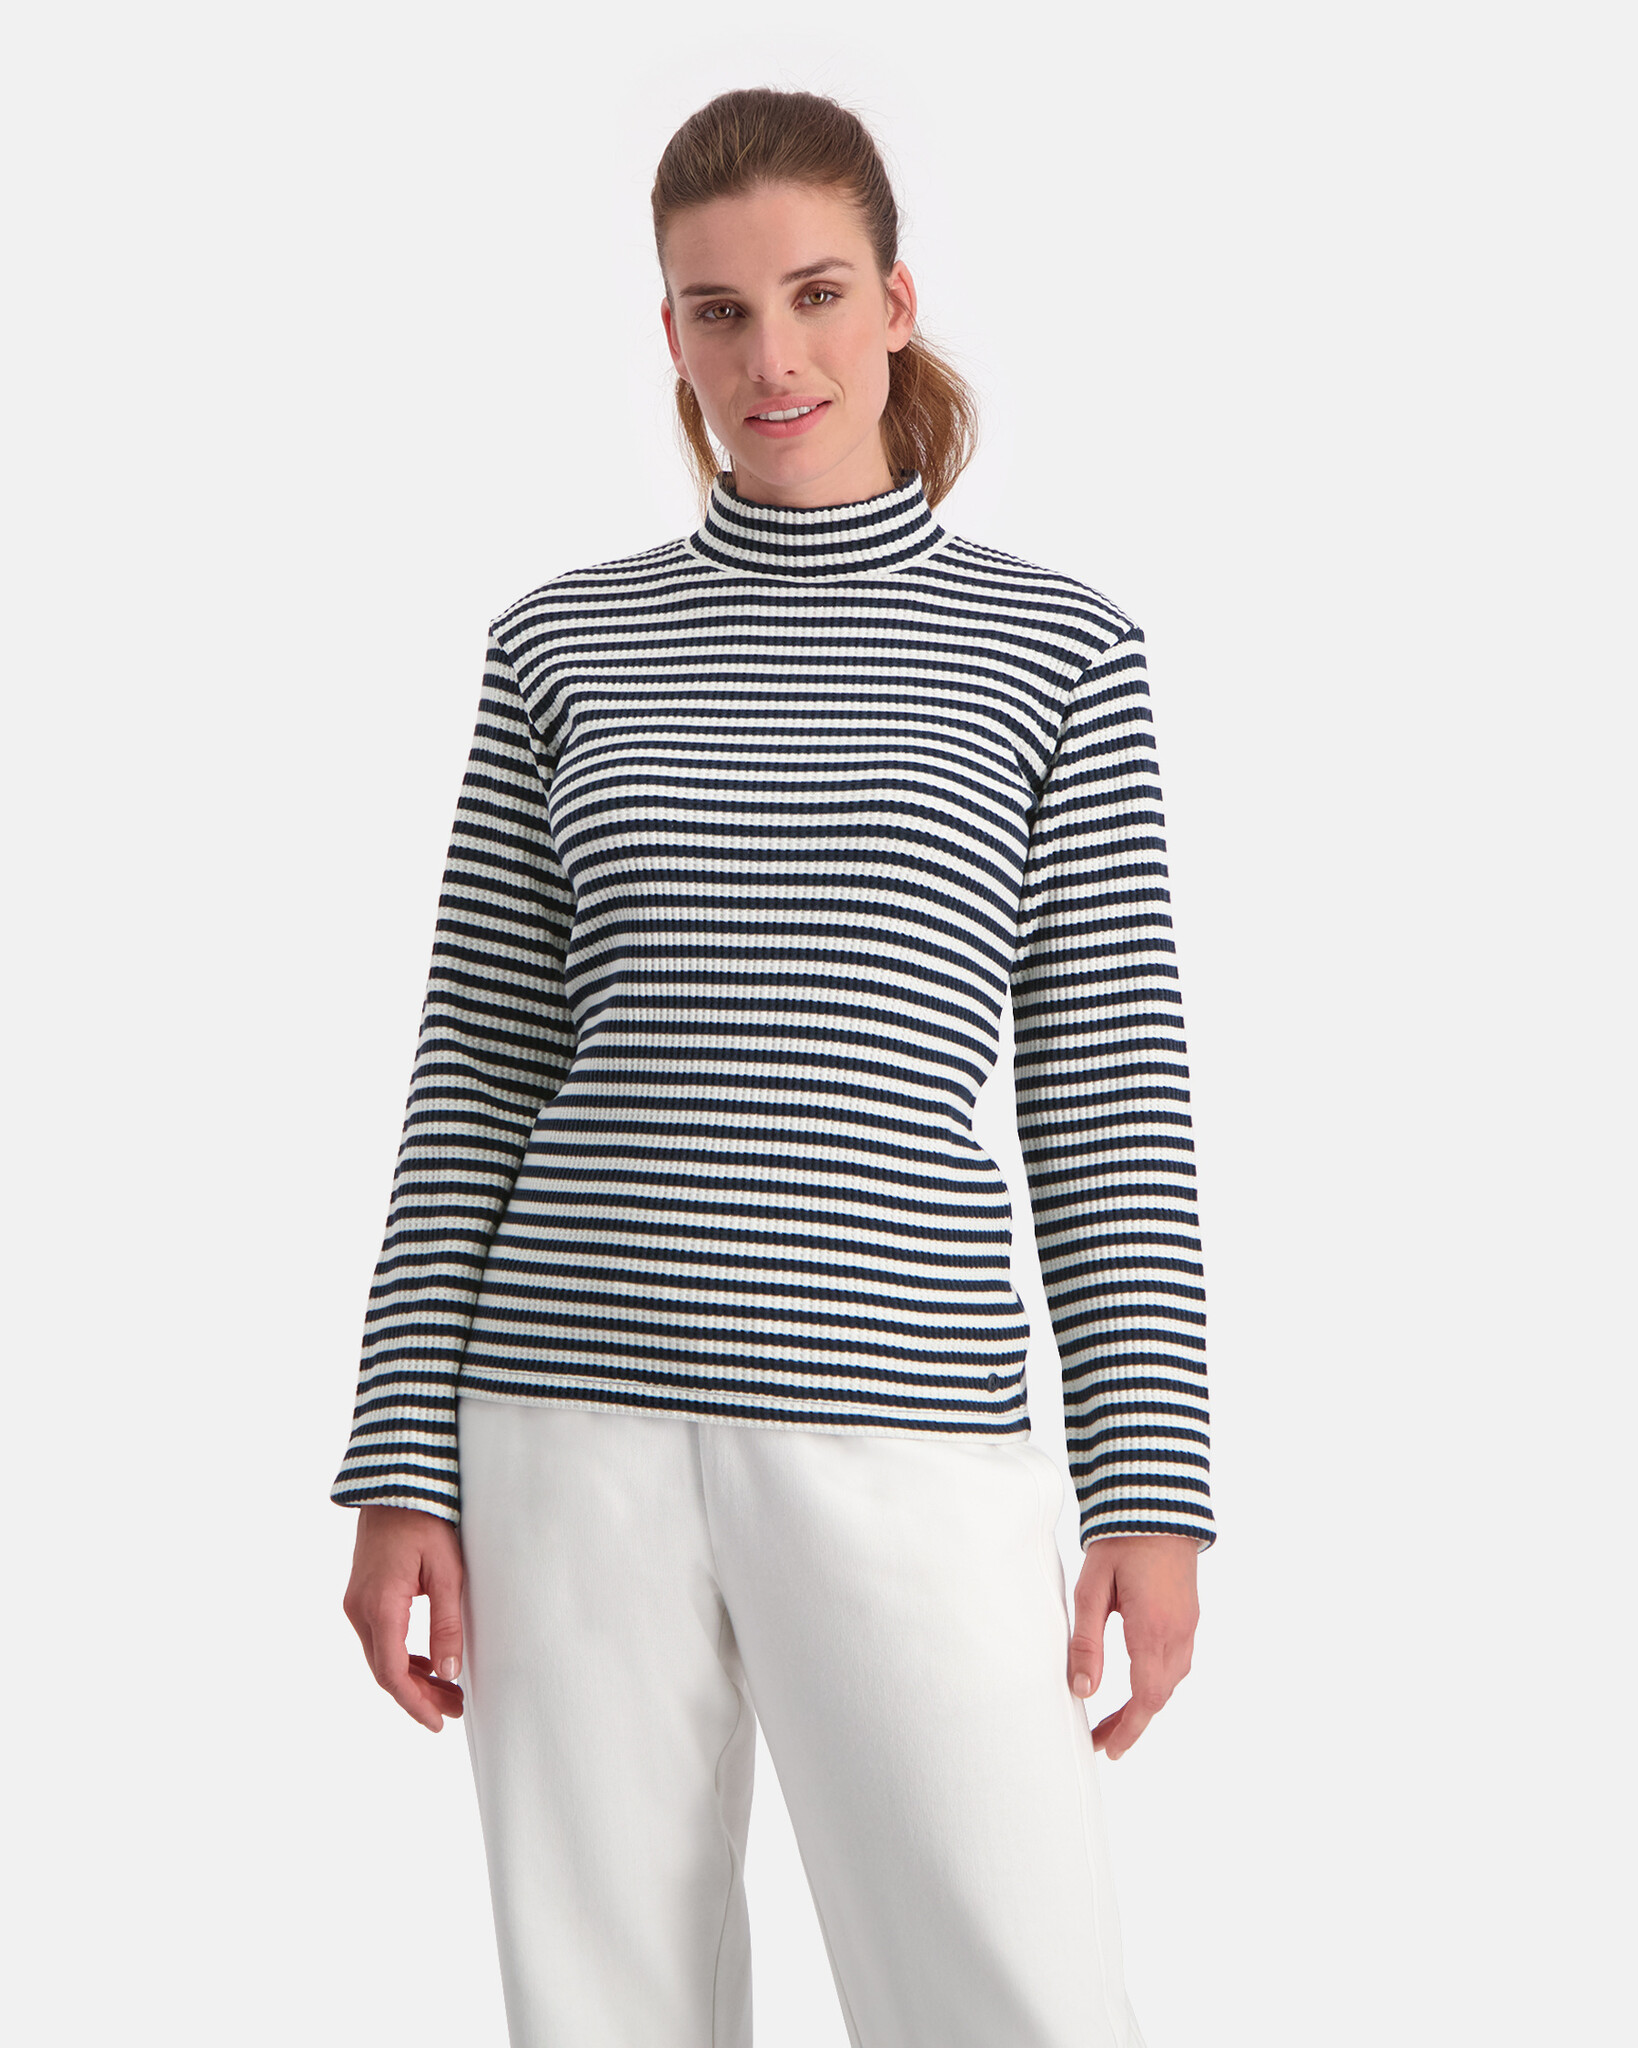 Slim fit turtle neck long sleeve made from yarn dyed stripped waffle fabric